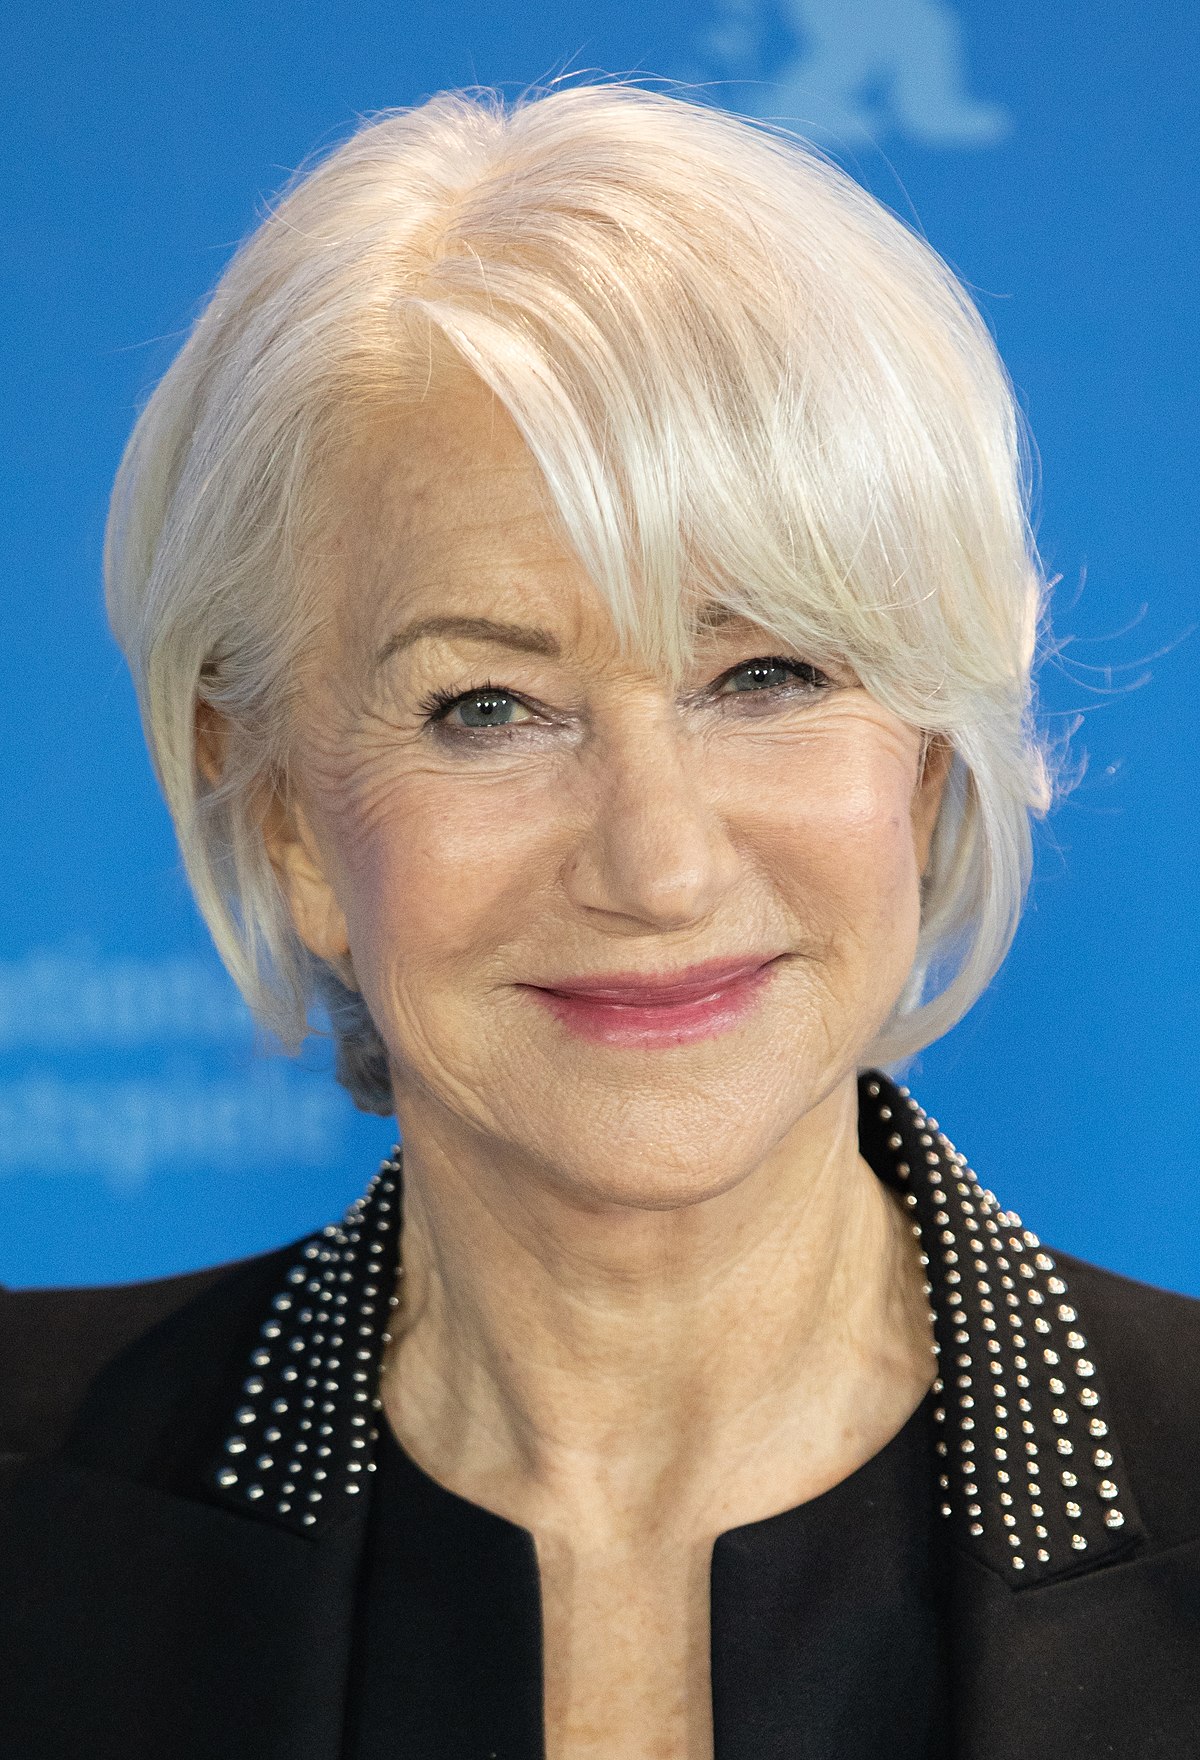 Helen Mirren to Be Honored with the 2021 SAG Life Achievement Award